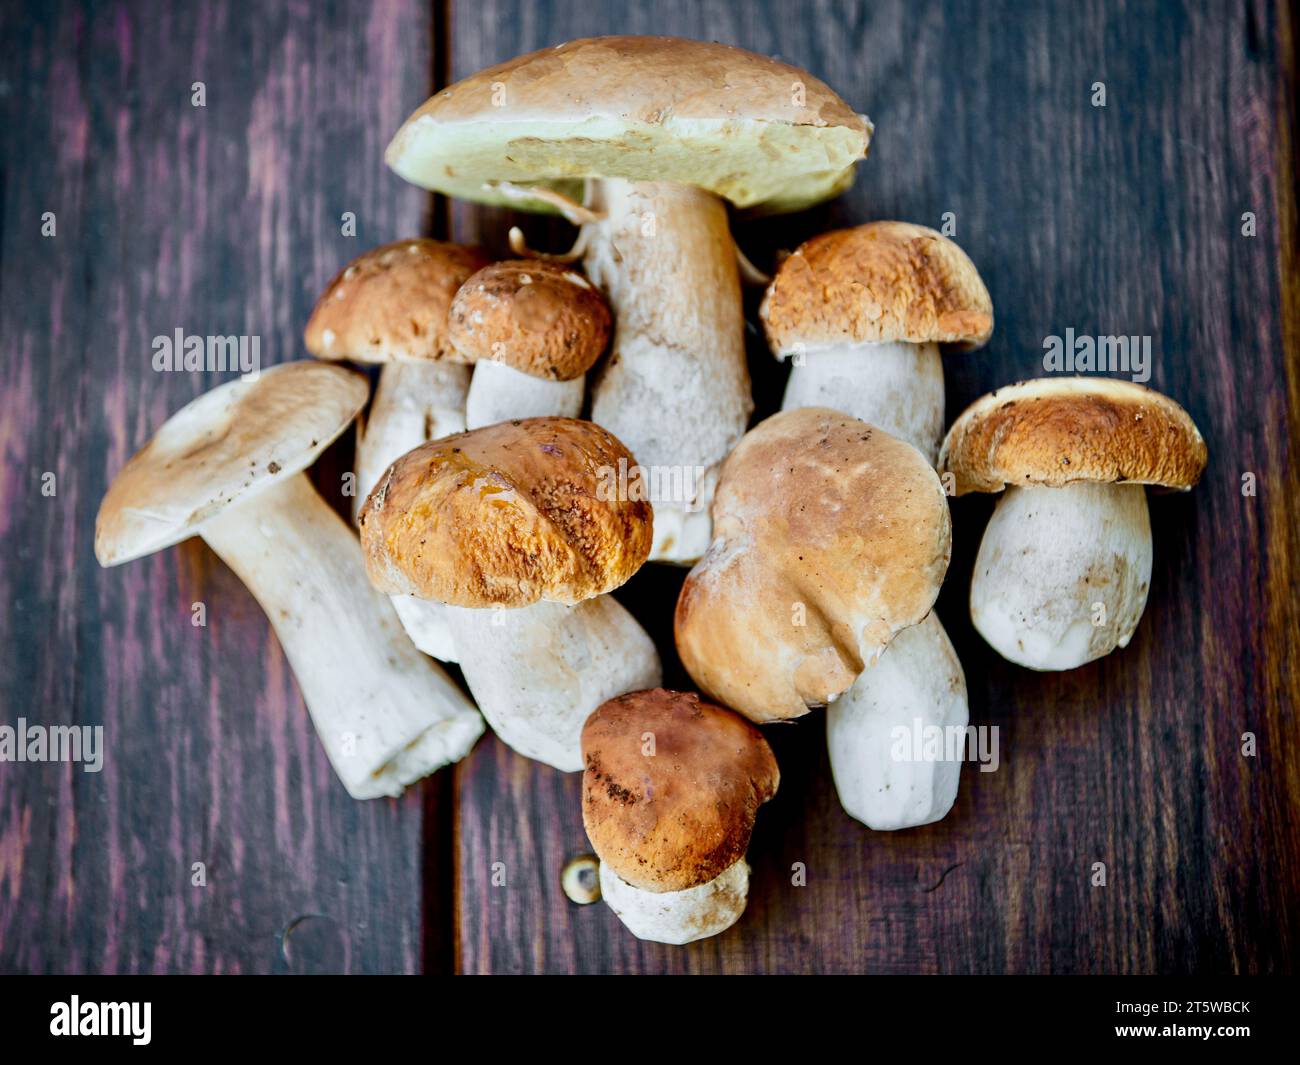 https://c8.alamy.com/comp/2T5WBCK/boletus-mushrooms-collected-in-the-forest-on-a-wooden-table-poland-2T5WBCK.jpg